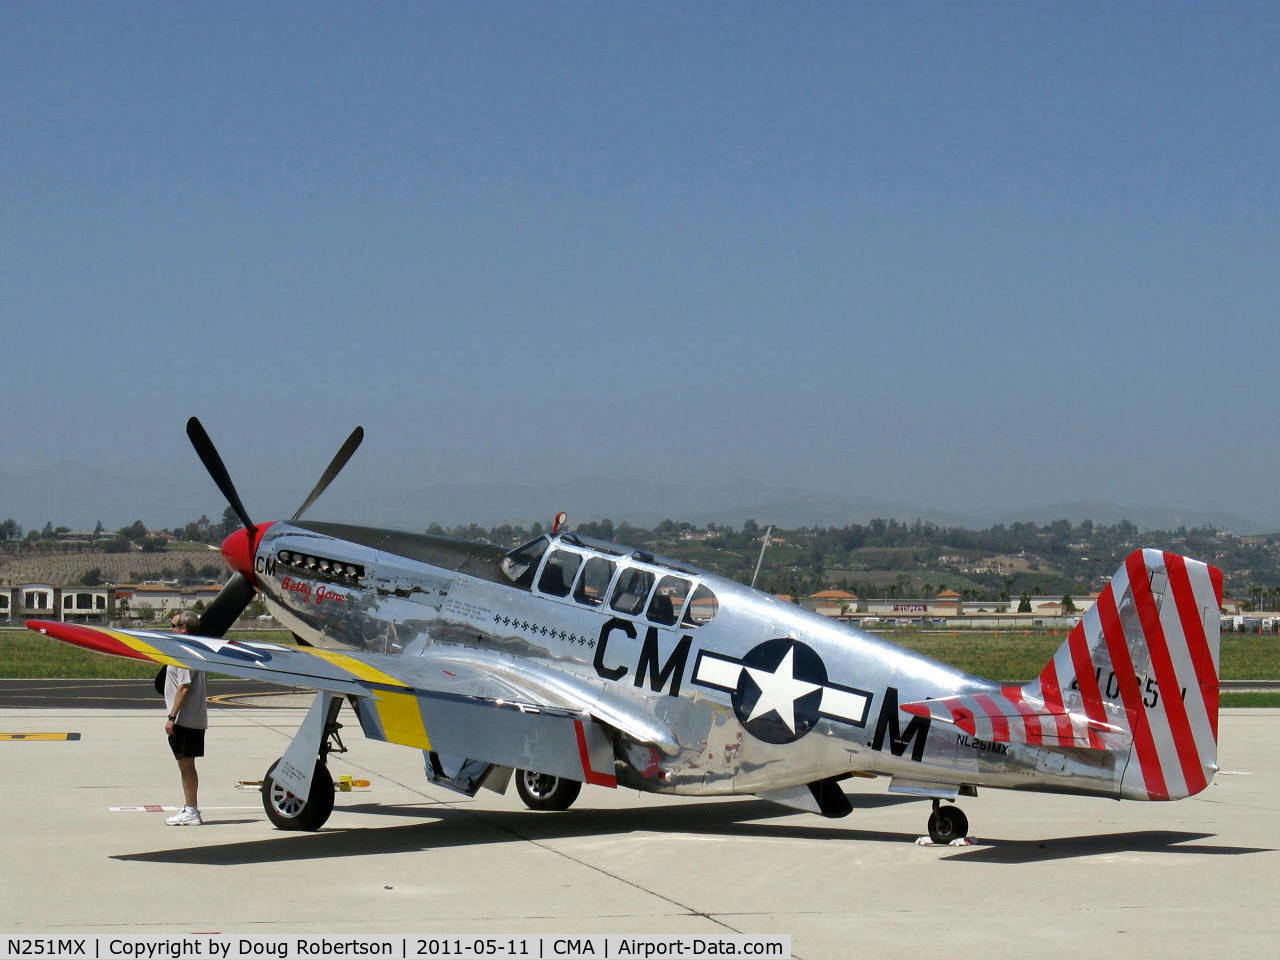 N251MX, 1943 North American P-51C-10 Mustang C/N 103-22730, 1943 North American TP-51C-10 MUSTANG 'Betty Jane', Packard Liberty/RR V-1650-3 1,380 Hp, mod. for tandem dual control. World's SOLE REMAINING EXAMPLE of just five TP-51Cs built. Limited class.